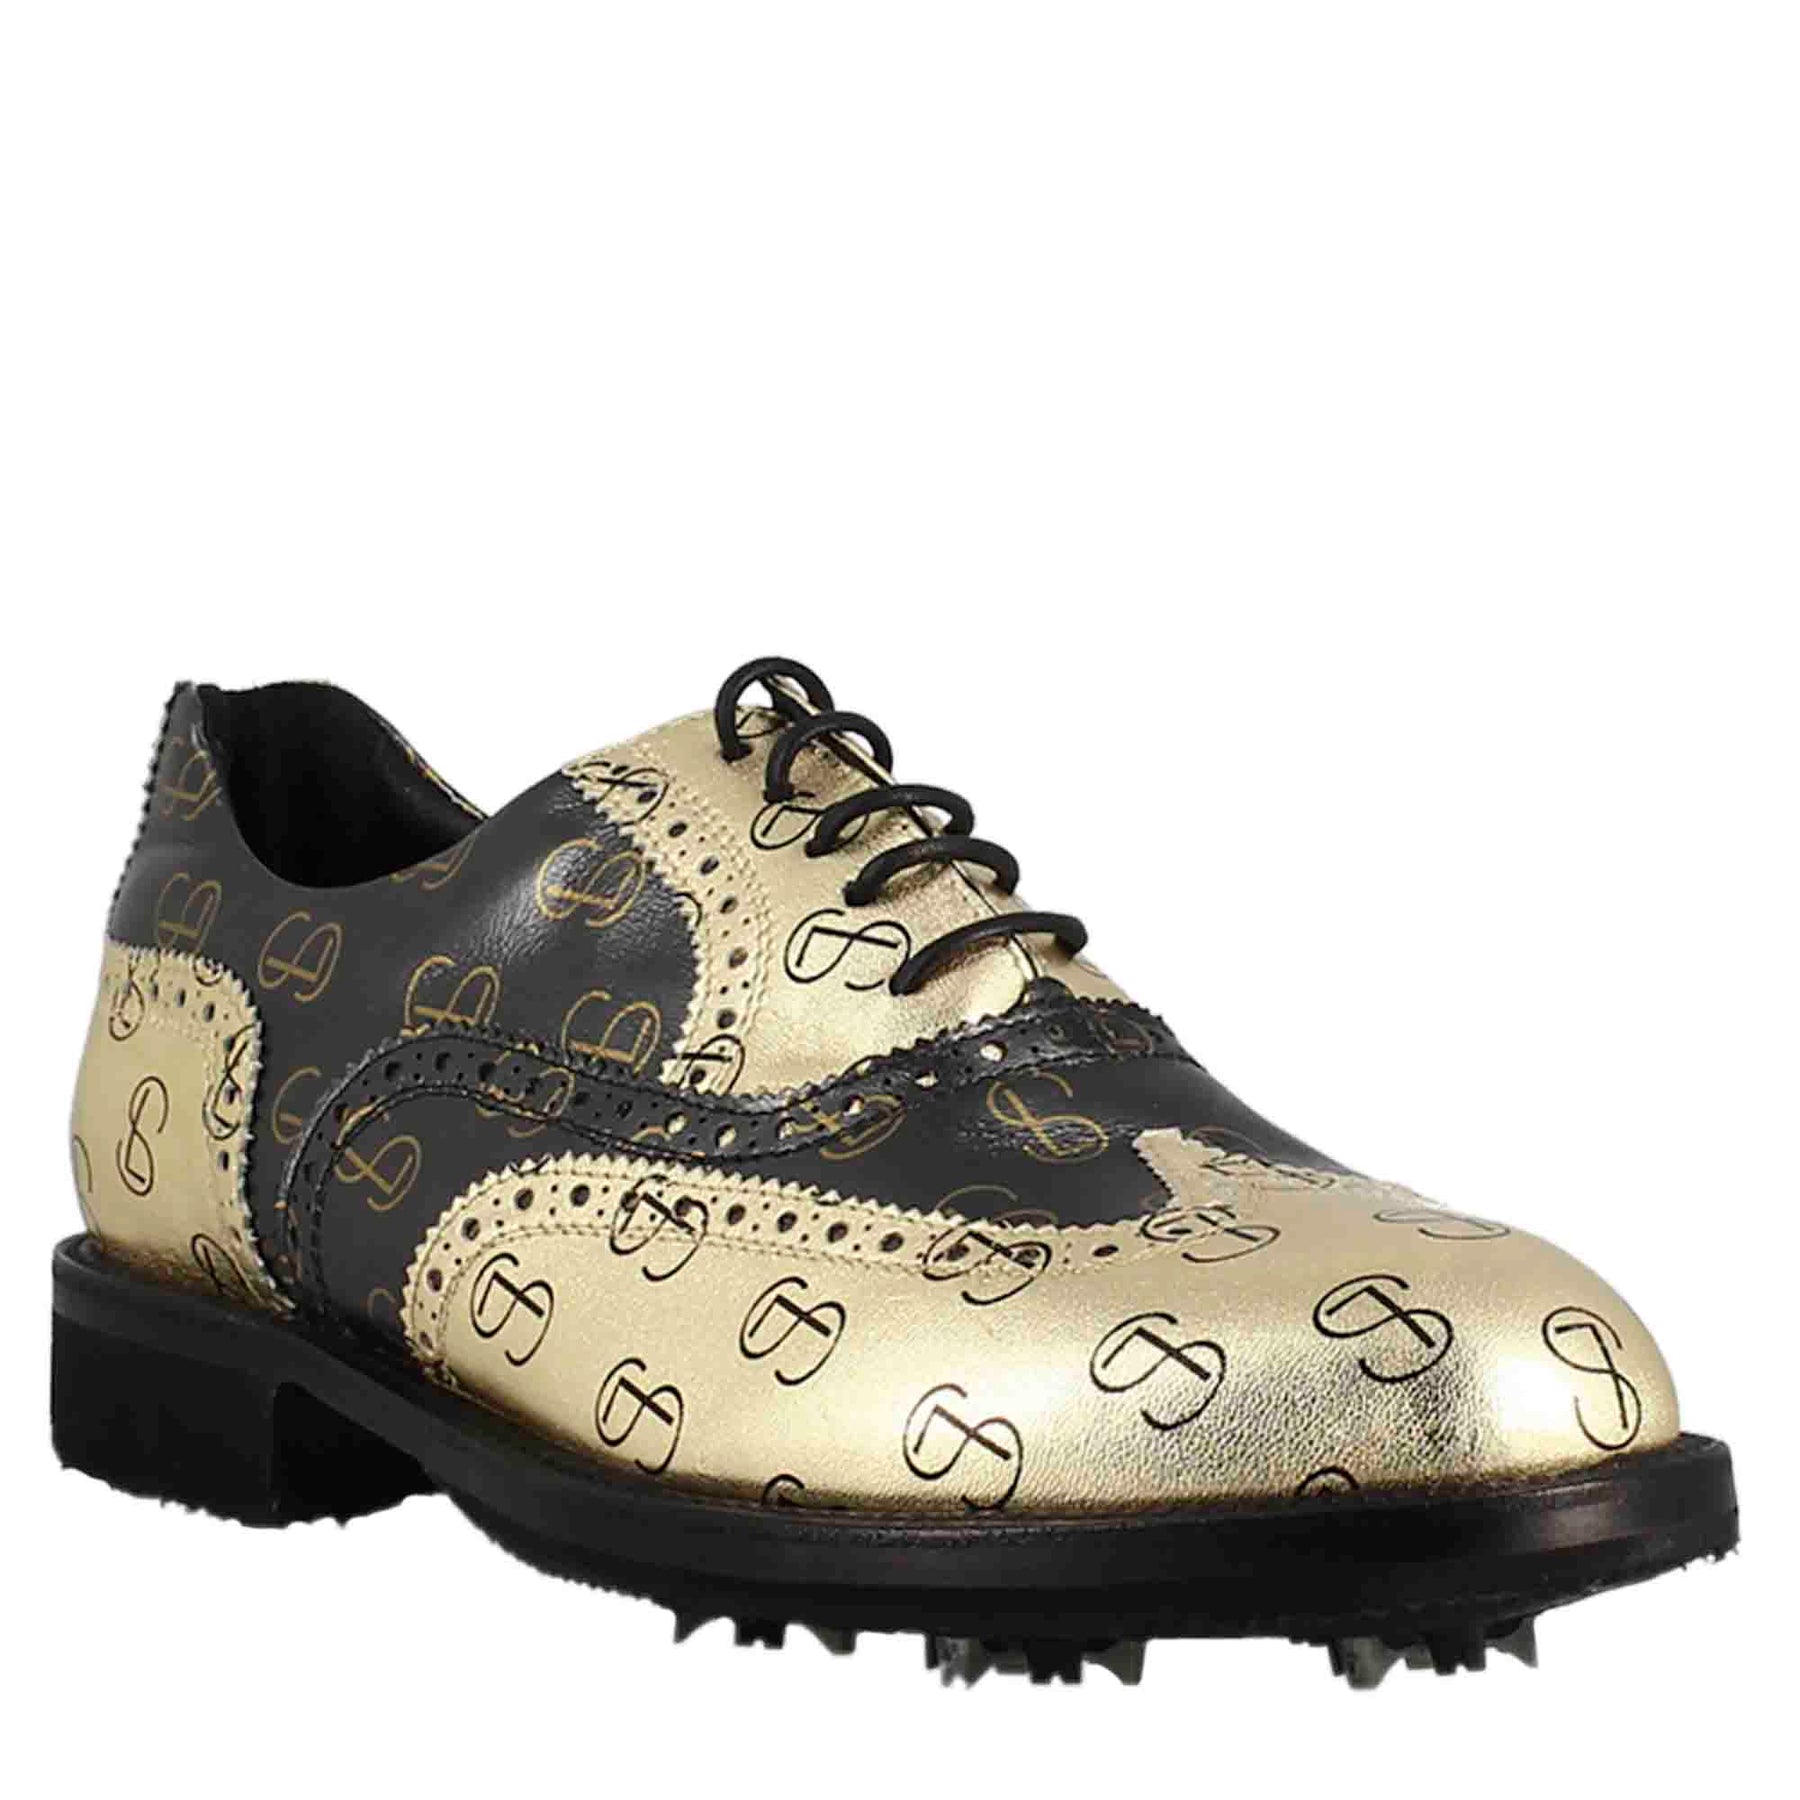 Men's two-tone black and gold full-grain leather golf shoes